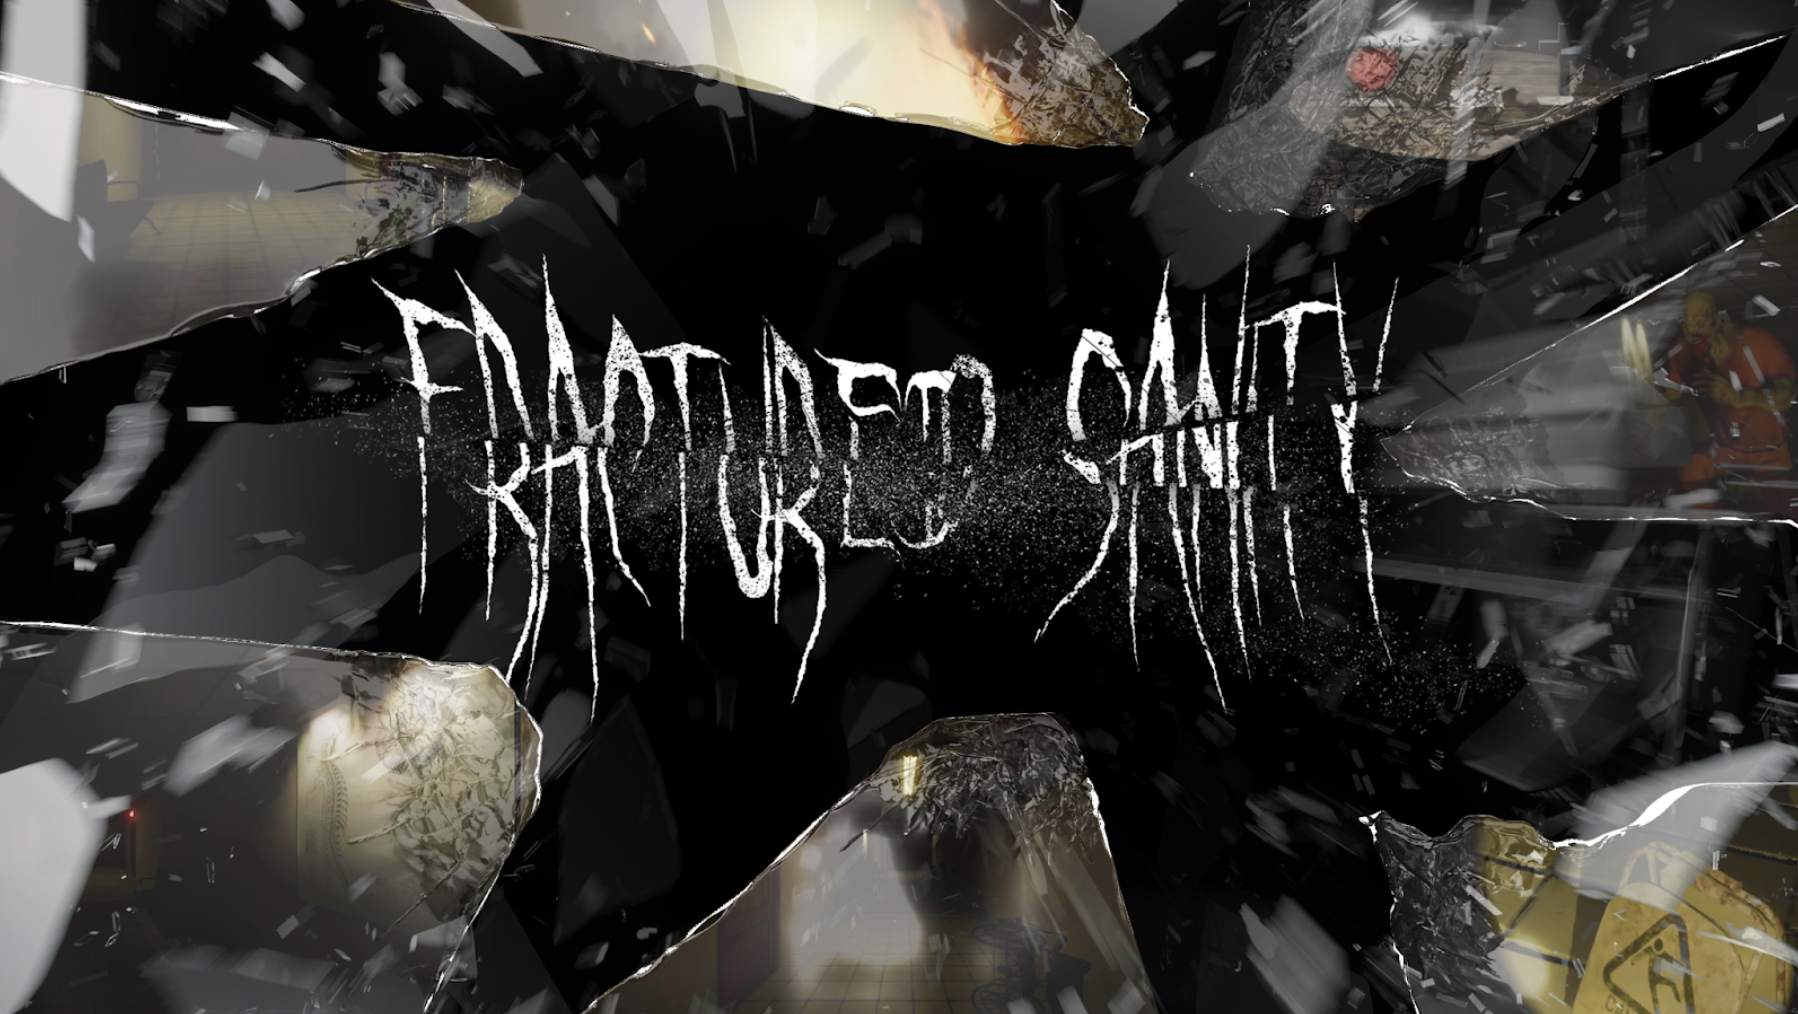 Fractured Sanity